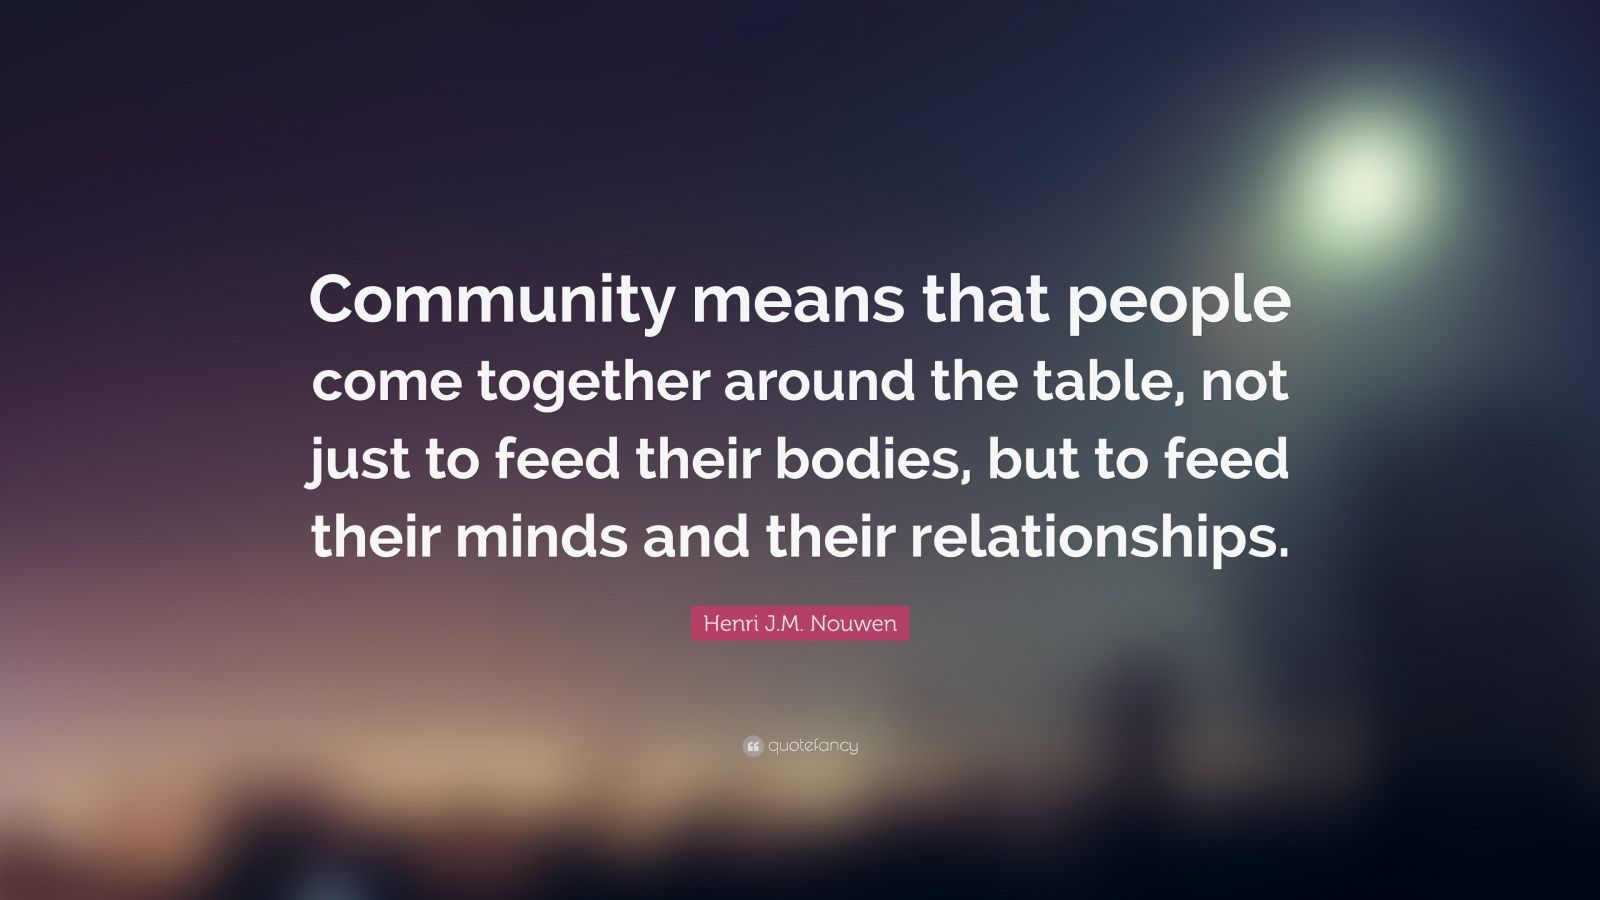 Henri J.M. Nouwen Quote: “Community means that people come together